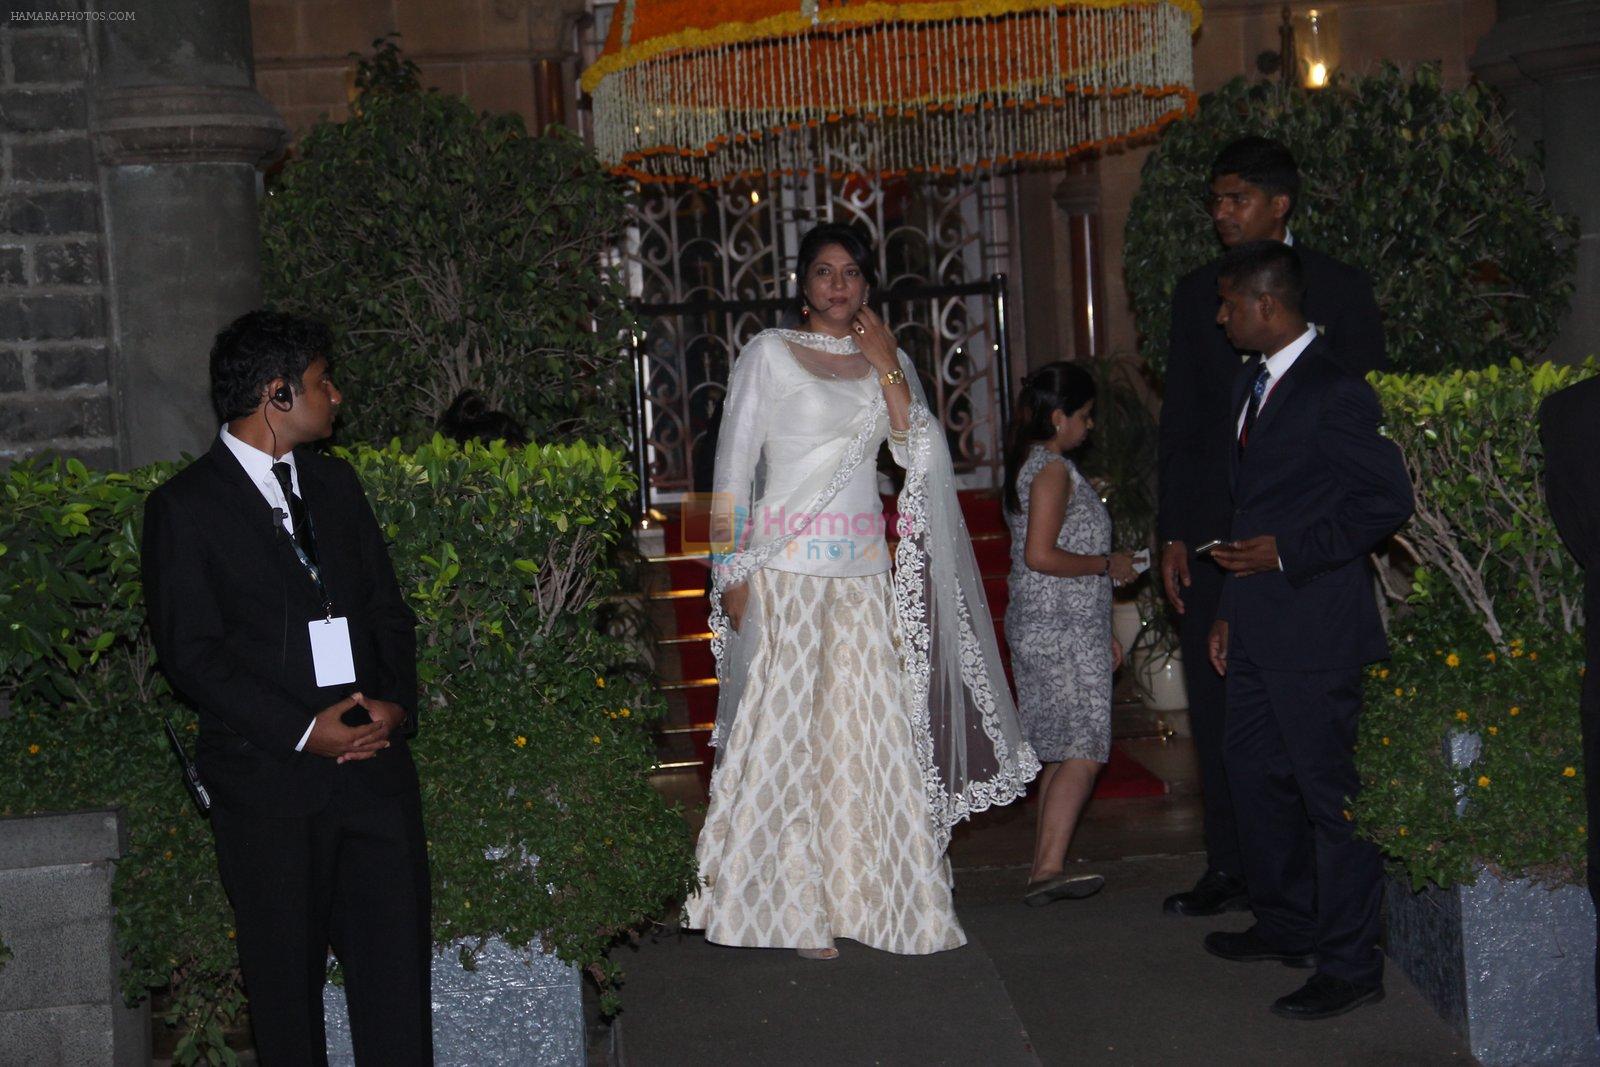 Priya Dutt at the Royal dinner by Prince William & Kate Middleton on 10th April 2016